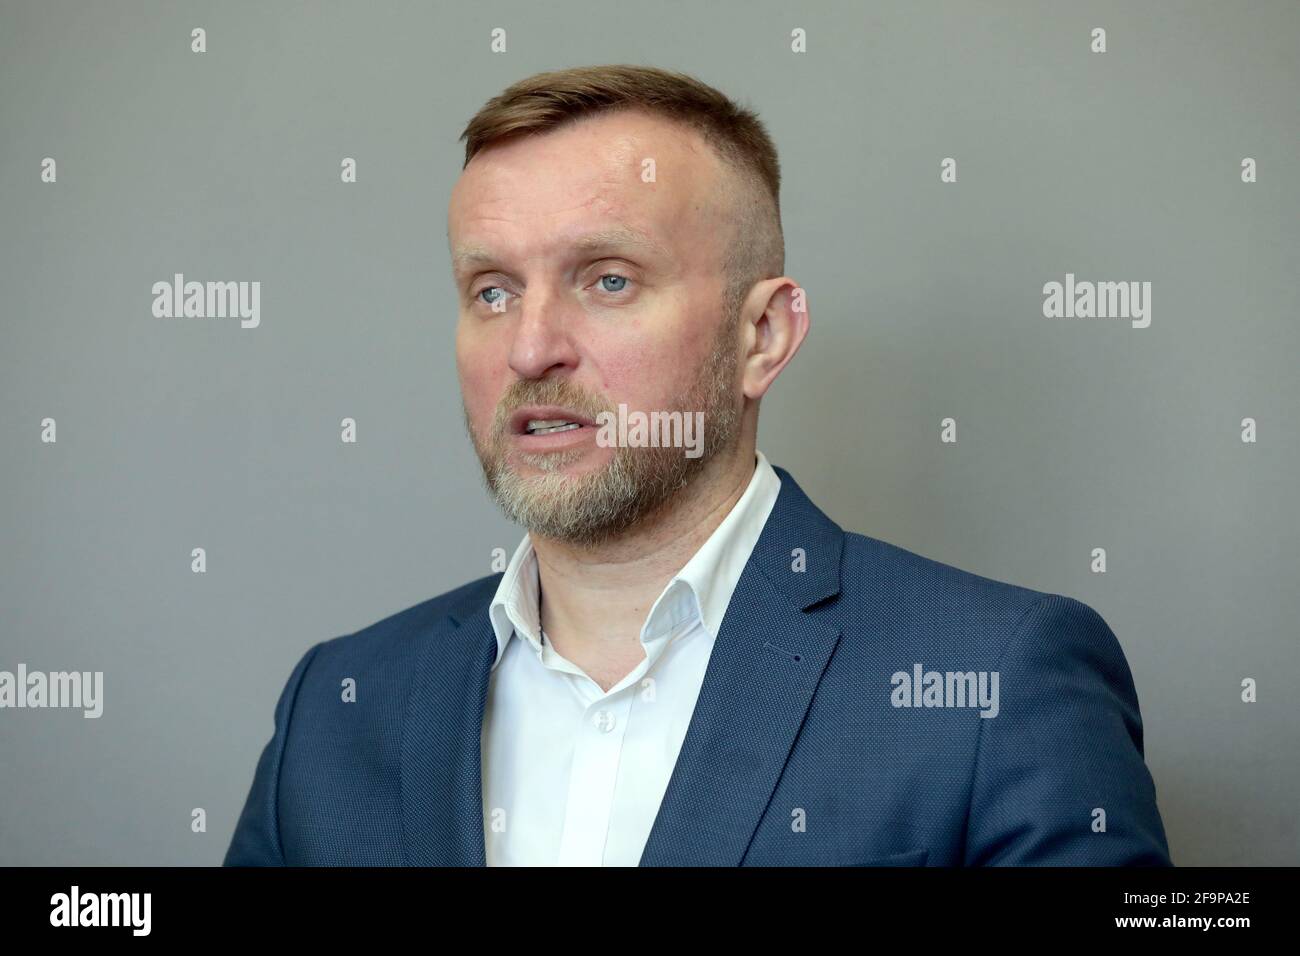 KYIV, UKRAINE - APRIL 19, 2021 - Head of the State Agency of Ukraine on Exclusion Zone Management Serhii Kostiuk gives an interview to a correspondent Stock Photo